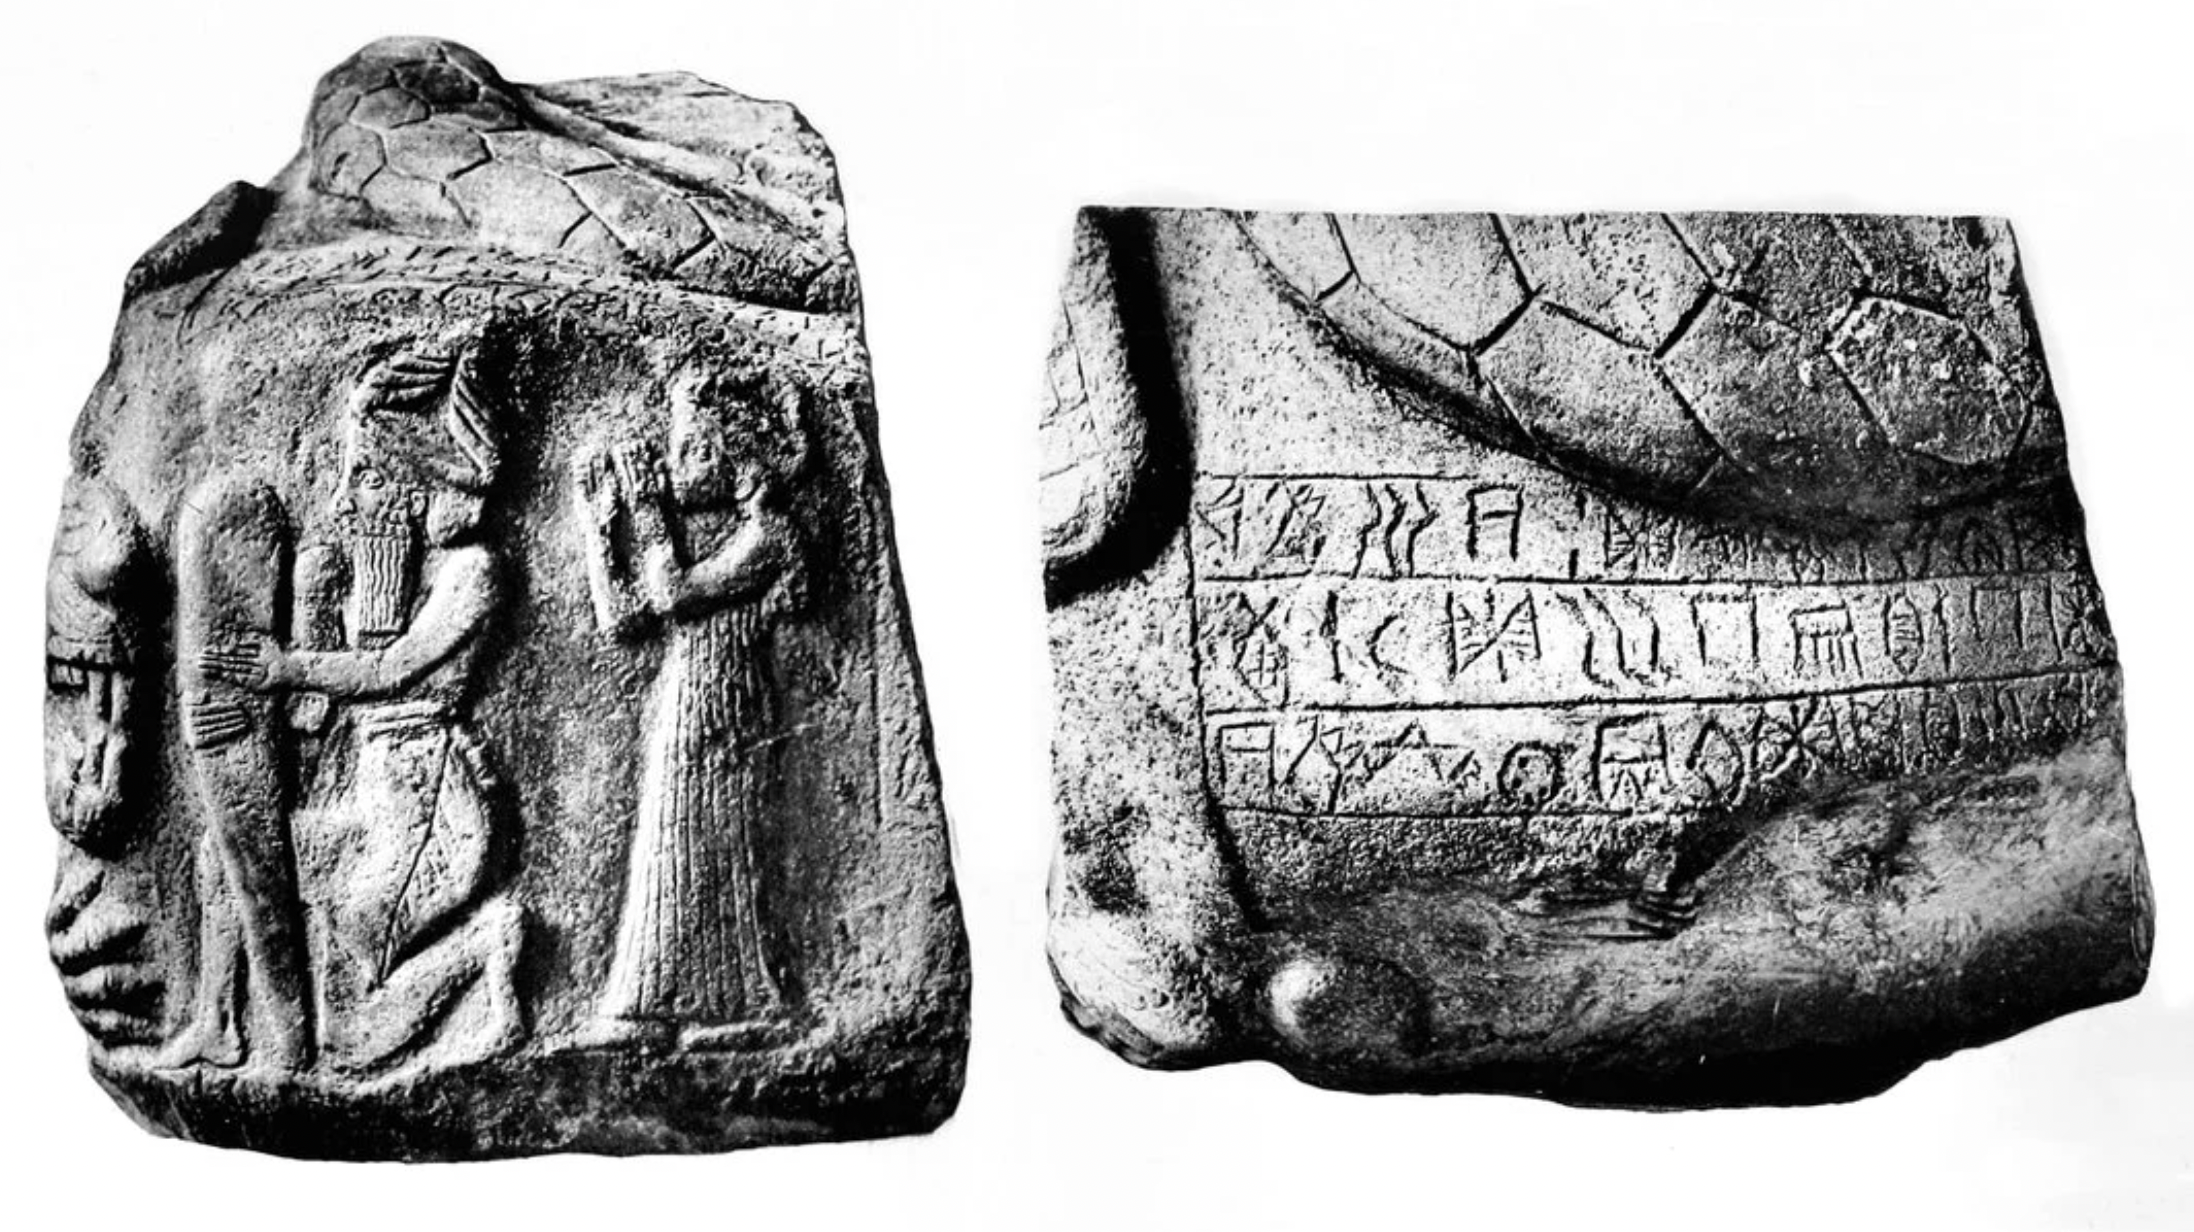 This illustration shows a perforated stone with Elamite inscriptions from the Louvre collections. Wikimedia Commons.